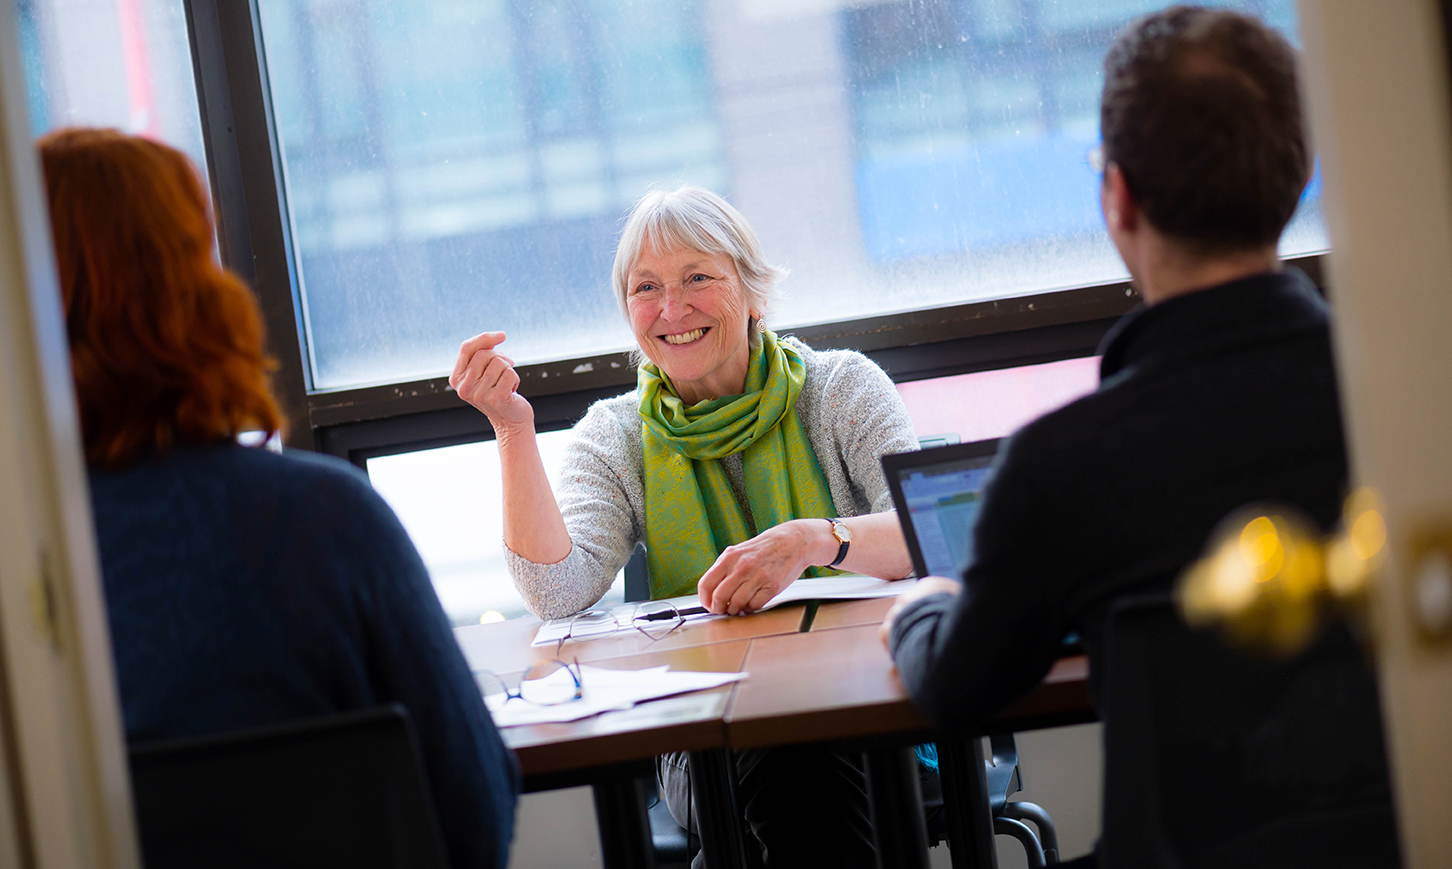 Angela Towle takes part in a meeting at the UBC Learning Exchange. She's smiling and wearing a lime green scarf over an off-white sweater and is gesturing to make a point as she speaks.